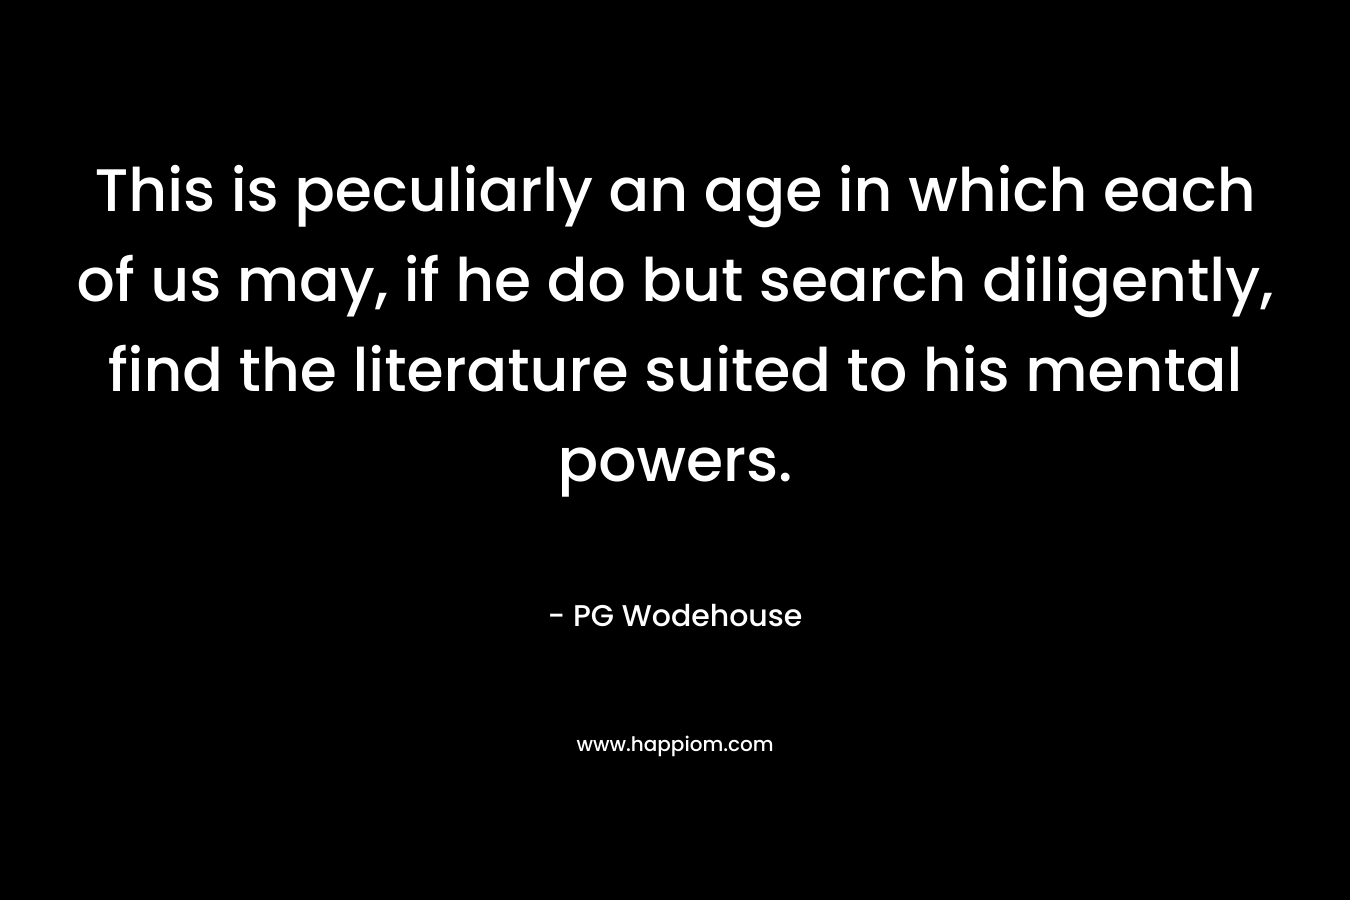 This is peculiarly an age in which each of us may, if he do but search diligently, find the literature suited to his mental powers. – PG Wodehouse